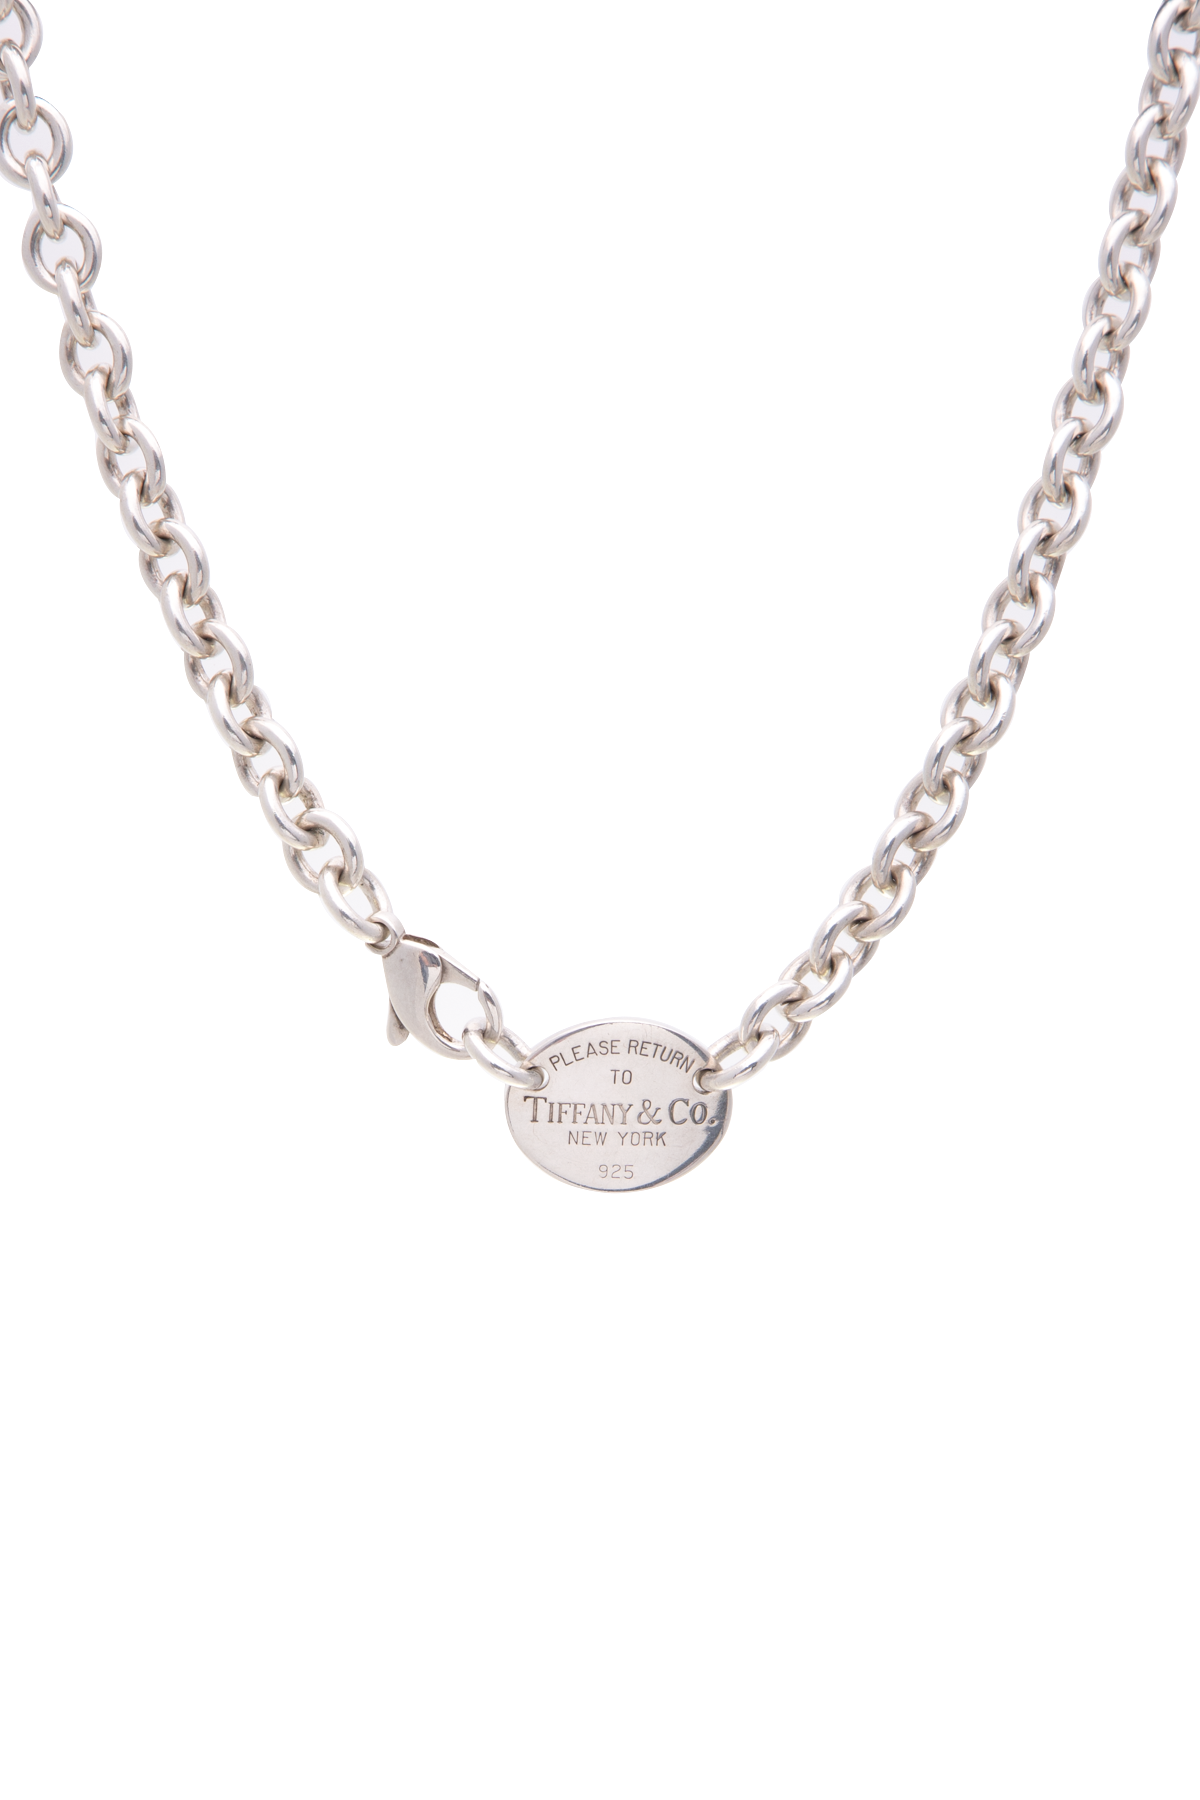 Tiffany & Co. to Tiffany Oval Tag - Couture USA